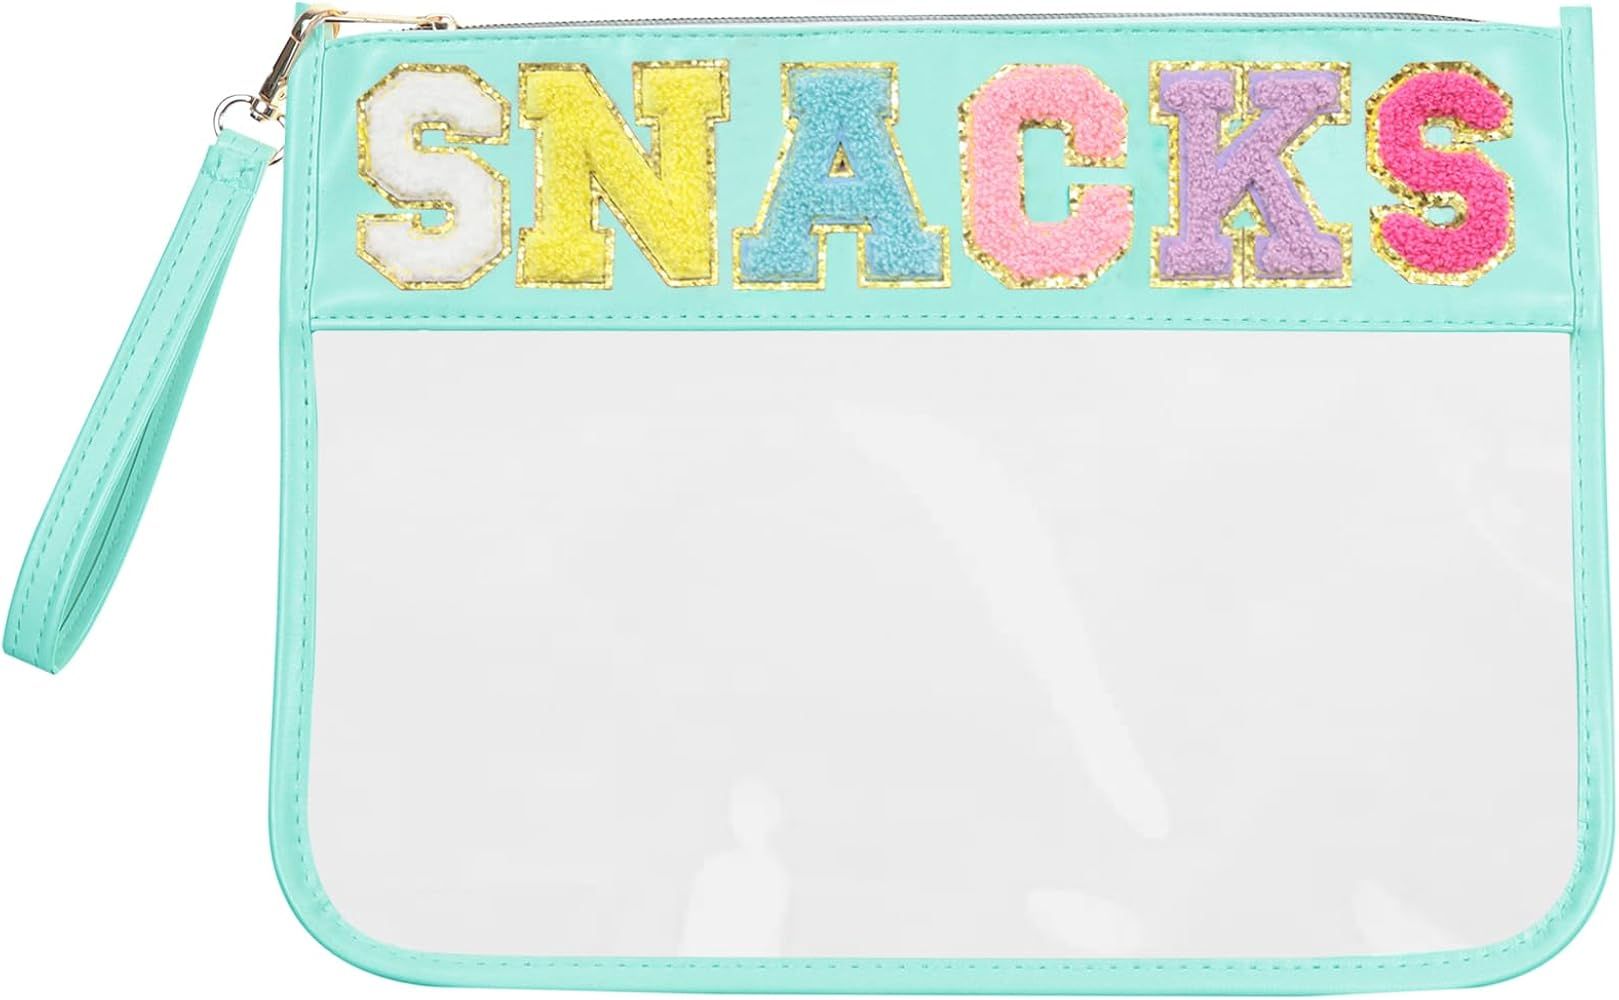 Siwara Snack Bags Clear Pouch Travel Makeup Bag Chenille Letter Bags for Zipper Pouch Clear Cosme... | Amazon (US)